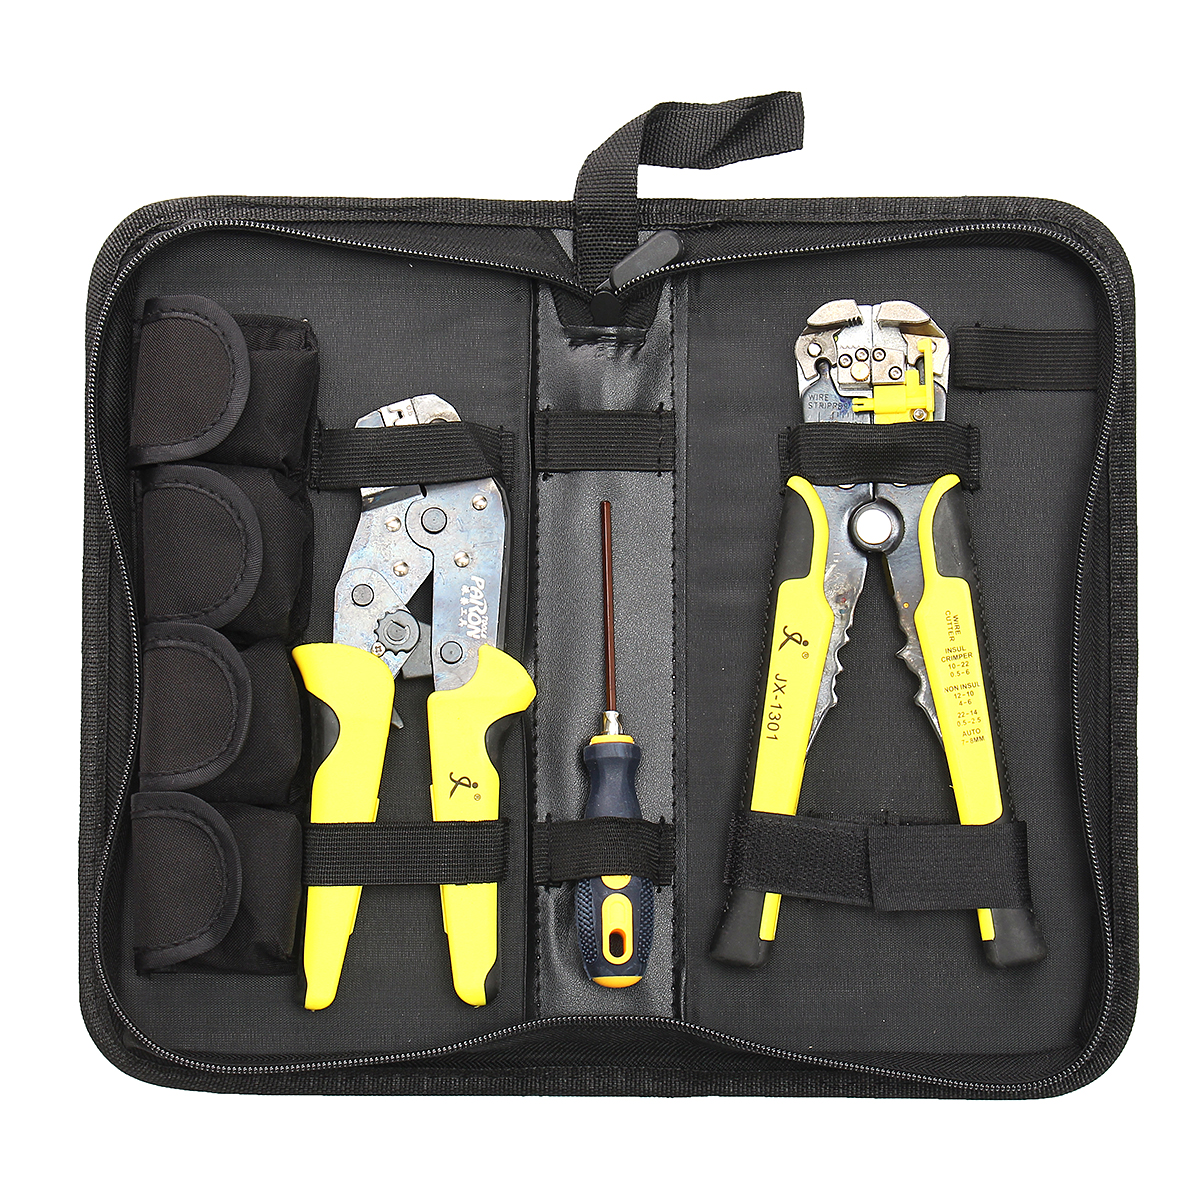 JX-D4301-Wire-Crimpers-Engineering-Ratcheting-Terminal-Crimping-Pliers-Tool-Set-1193651-8